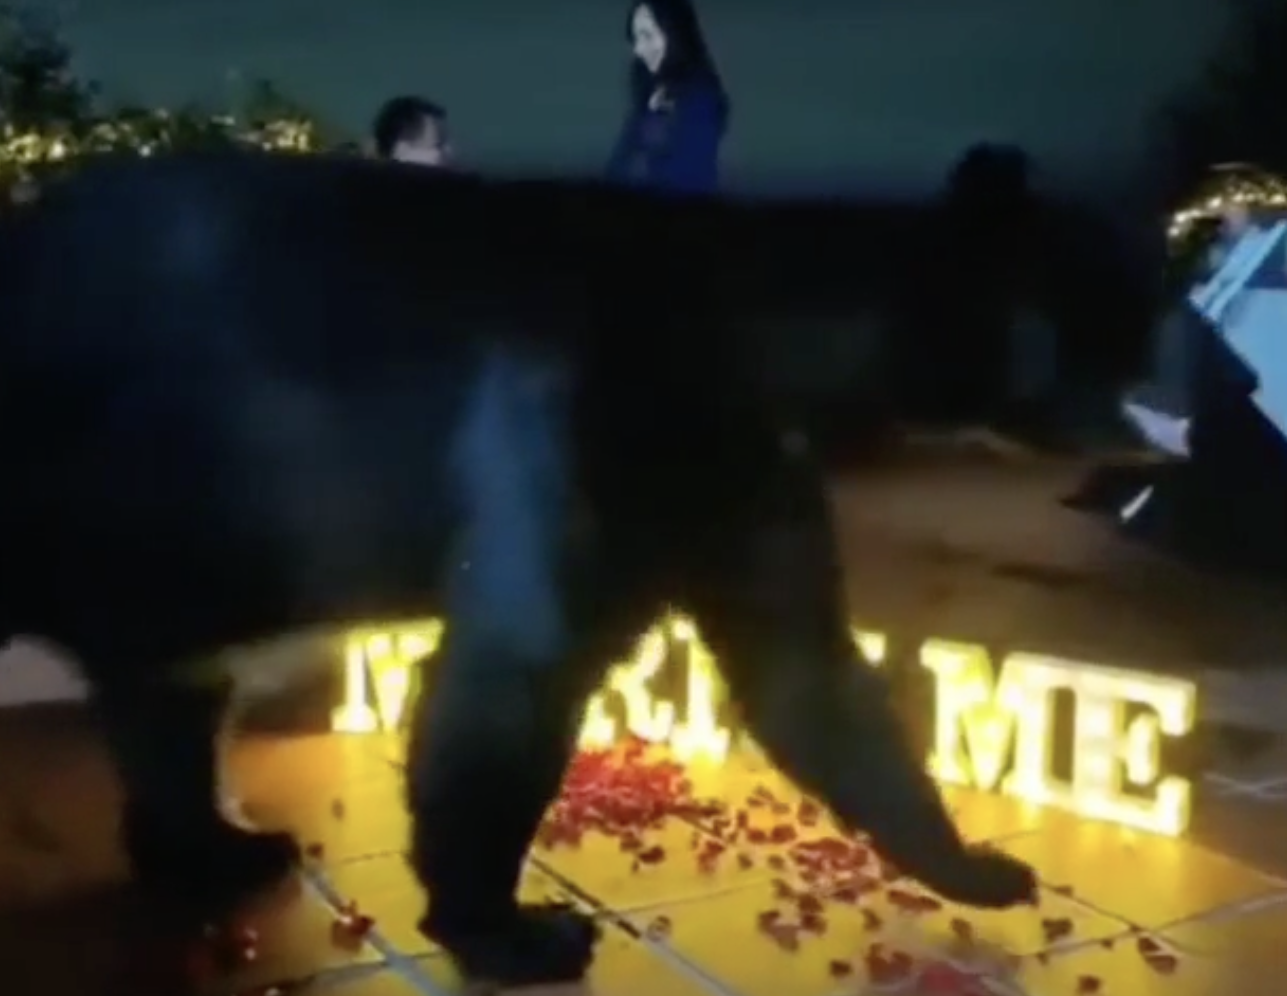 This bear casually interrupting a marriage proposal.